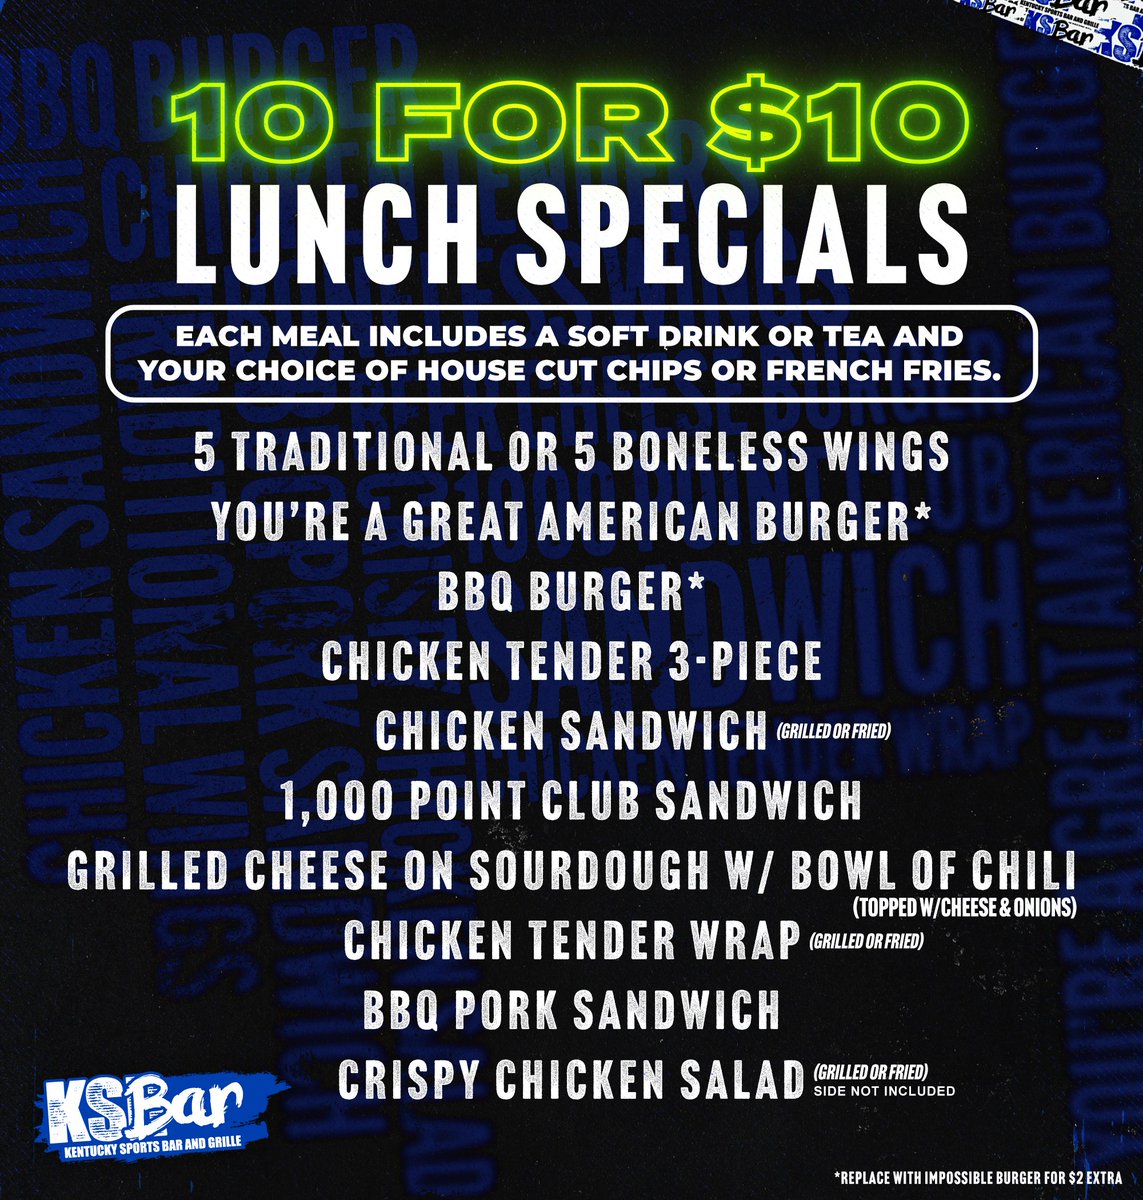 Peep that new addition to our 10 for $10 lunch menu. Never too hot outside for grilled cheese and chili...